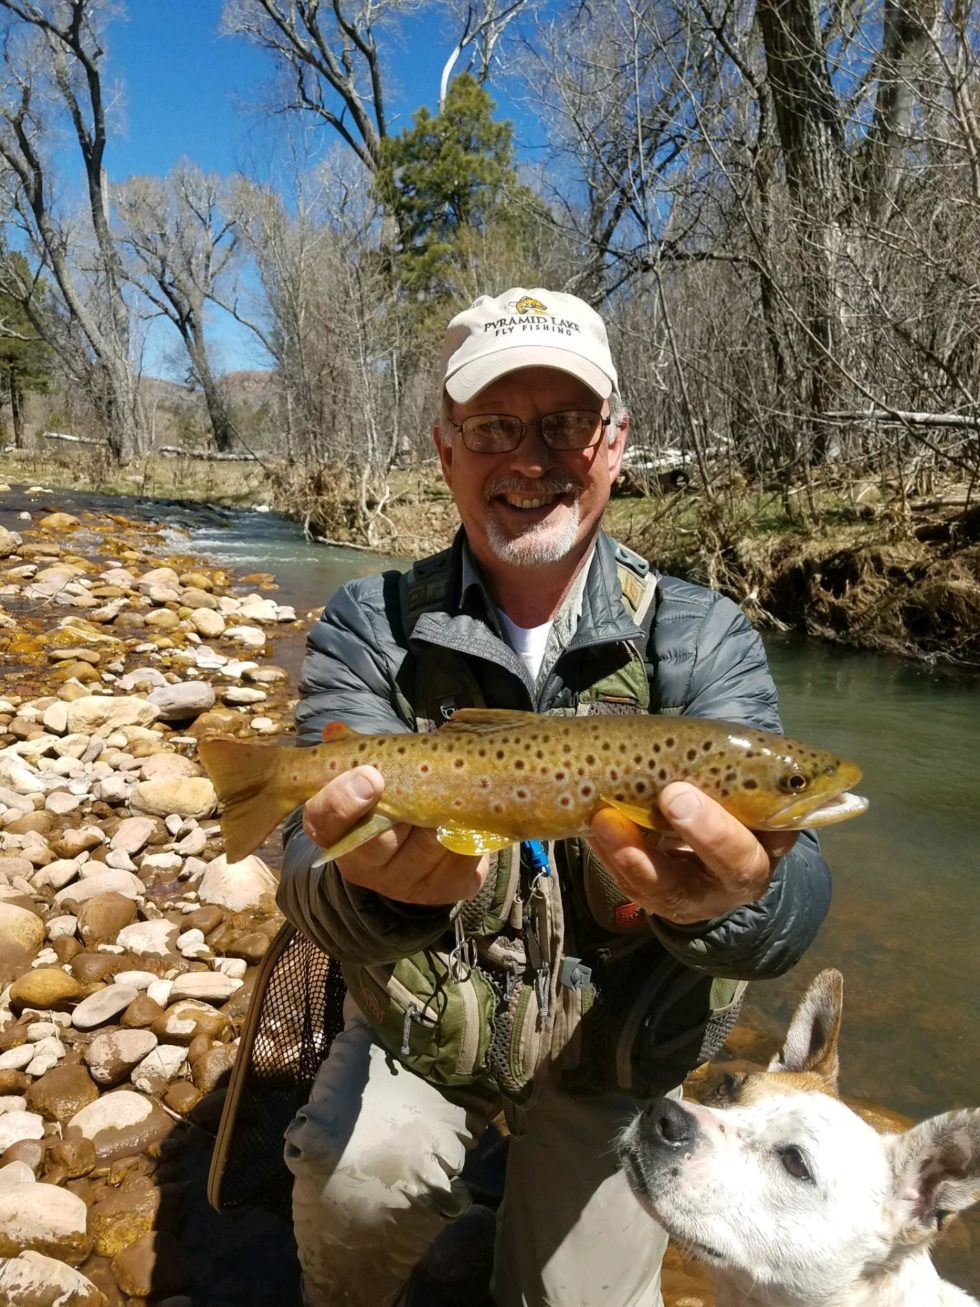 Fly Fish Arizona and Beyond Provide the highest quality fly fishing